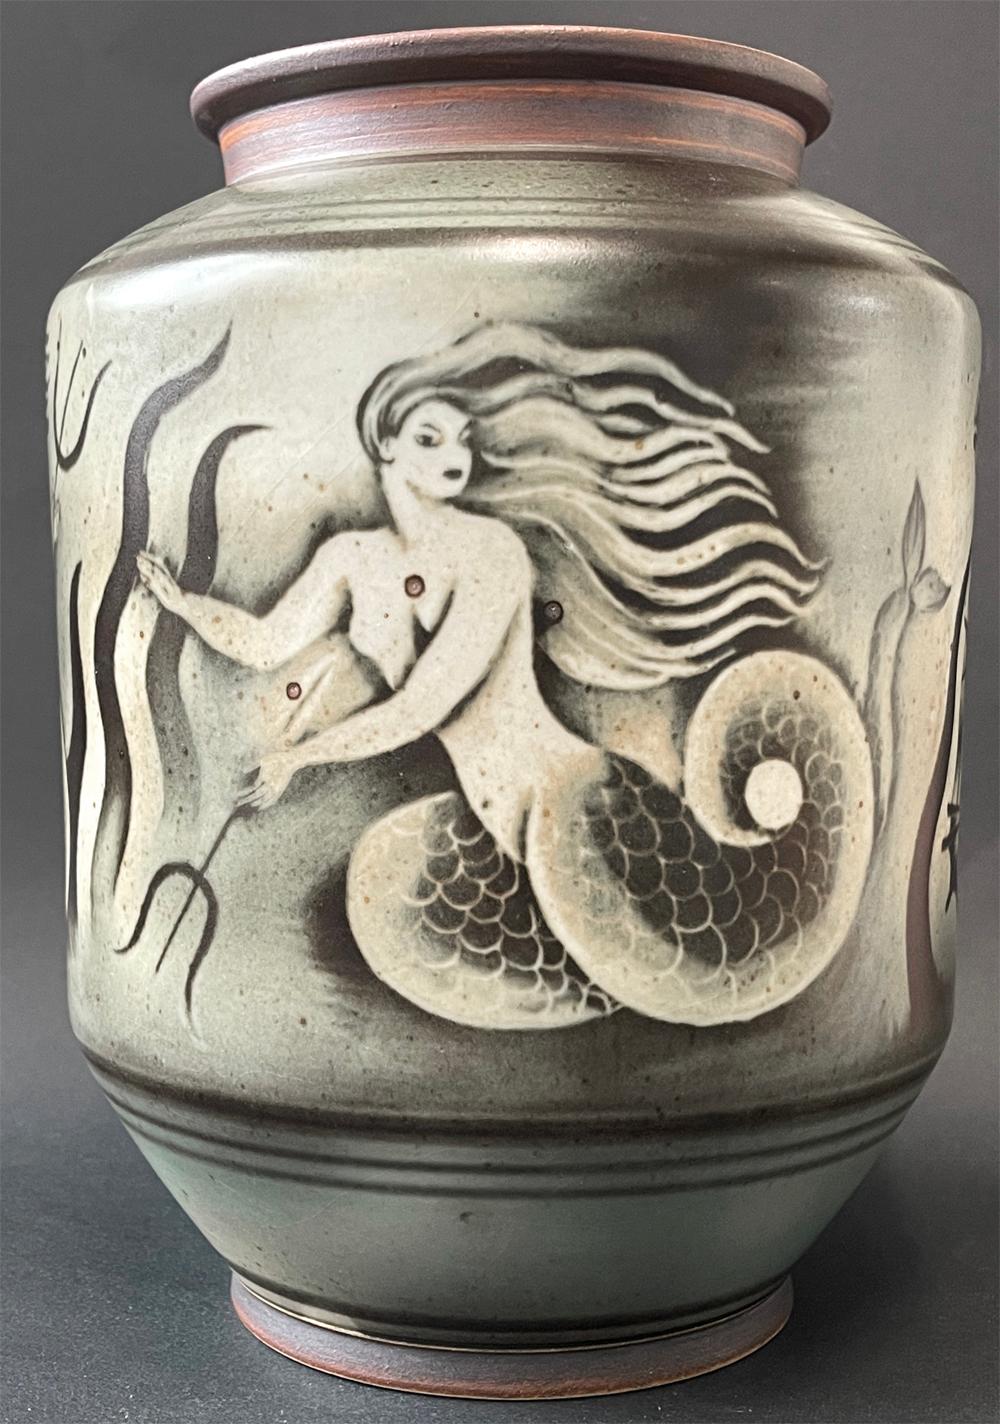 Striking and unique -- we've seen nothing like it before -- this vase or jar by Rorstrand, the famed Swedish porcelain maker, features three Art Deco mermaids cavorting in the sea amidst seaweed and ocean waves, all expressed in a rich, grey-green